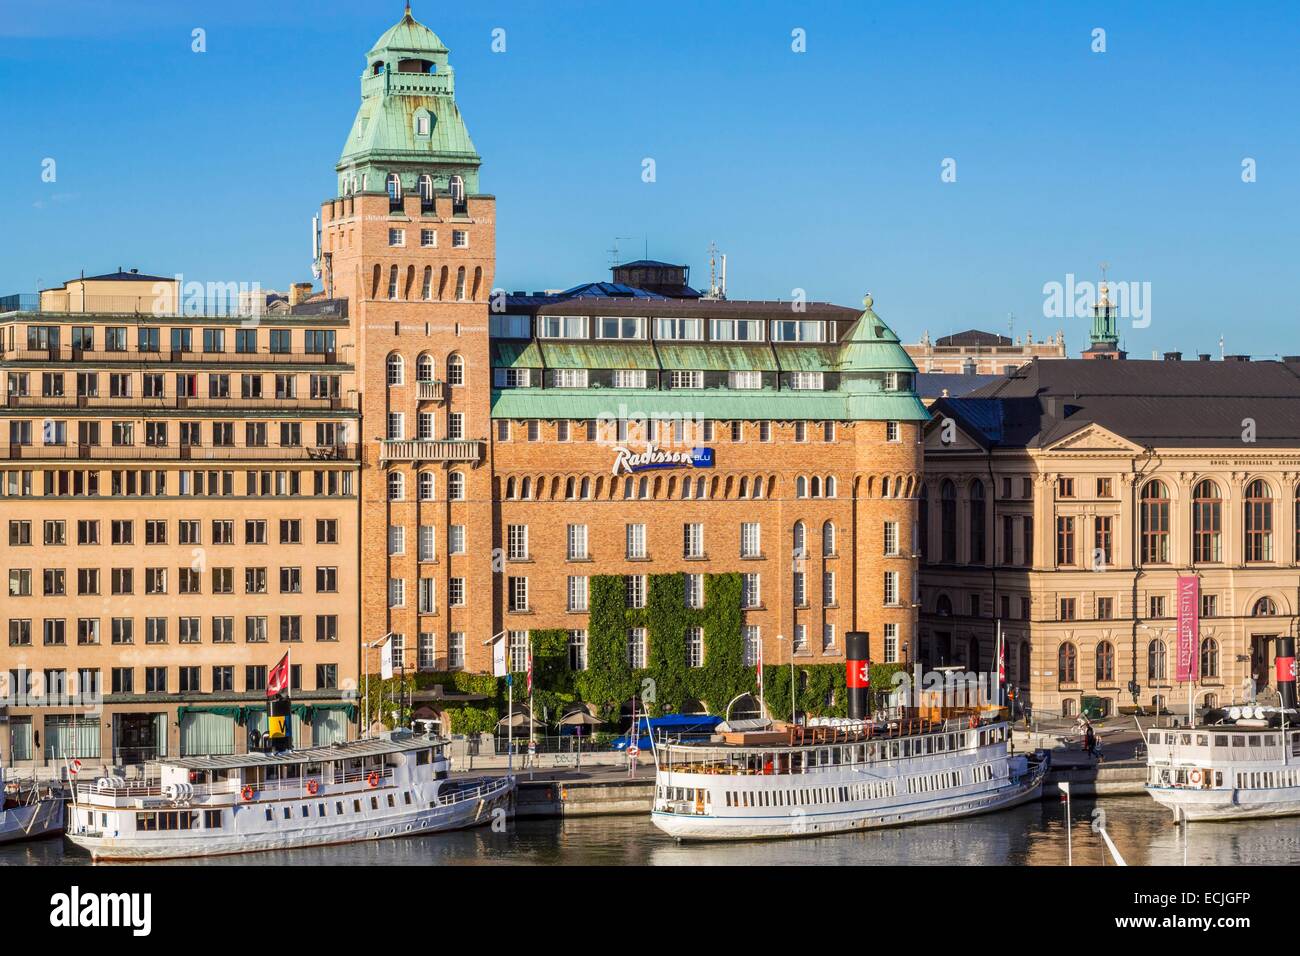 Sweden, Stockholm, Radisson Blu Strand designed by architect Ludwig Peterson and built in 1912 Stock Photo